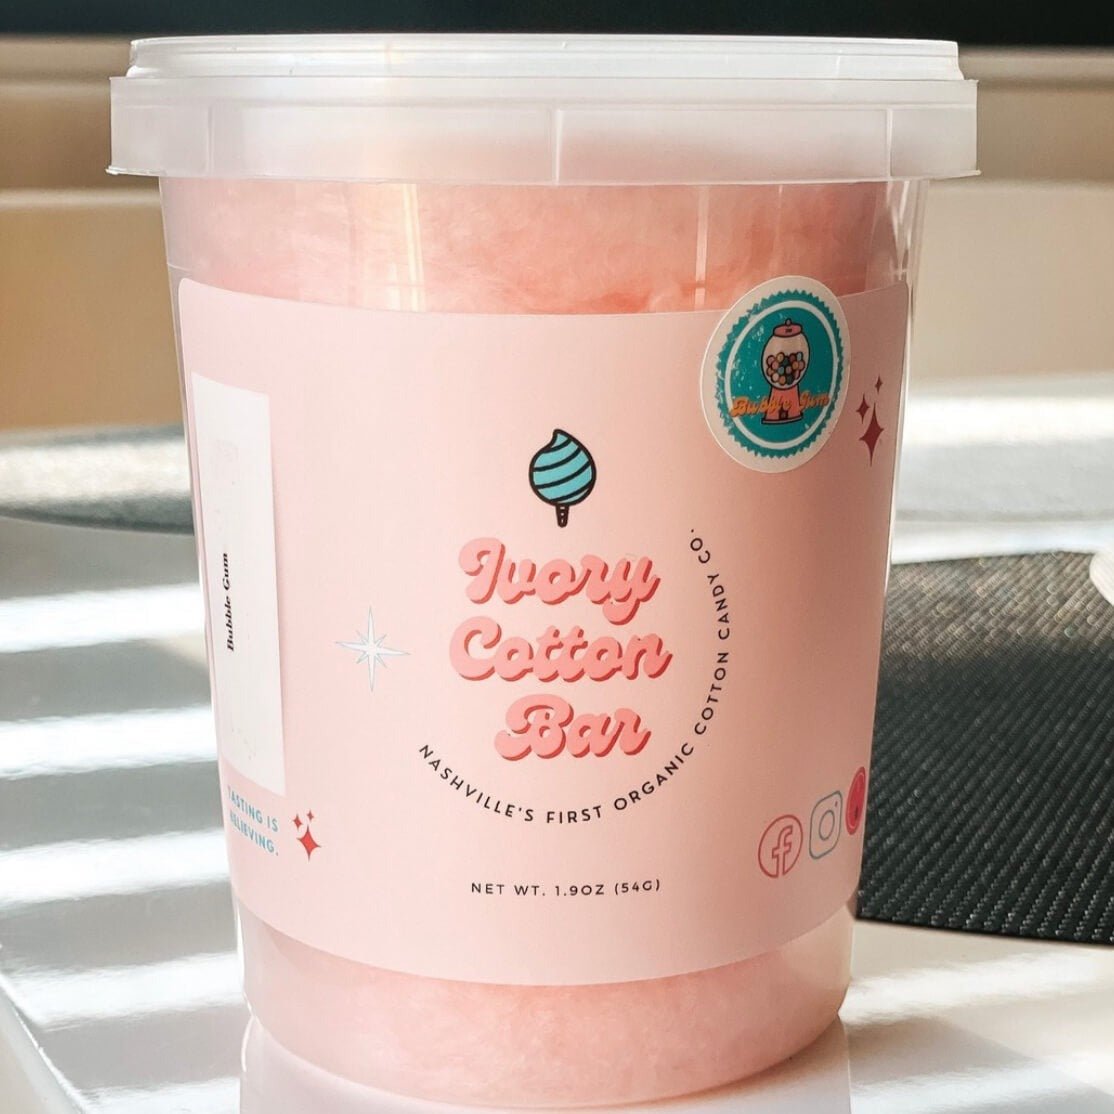 Ivory Cotton Bar Cotton Candy - $12 - The Local Y'all